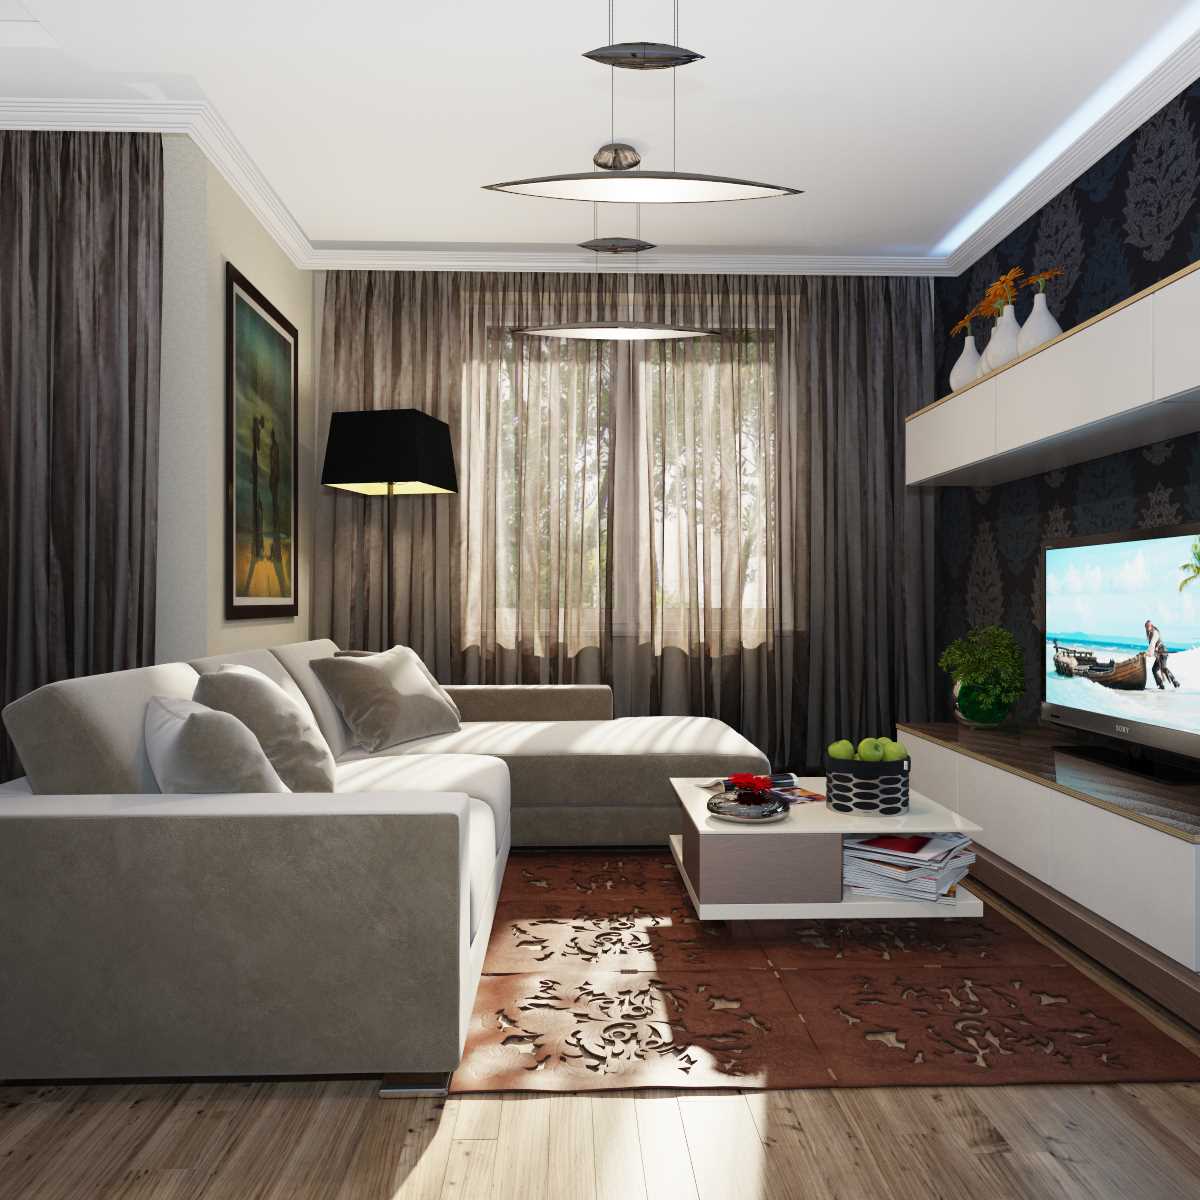 An example of a bright style living room 19-20 sq.m